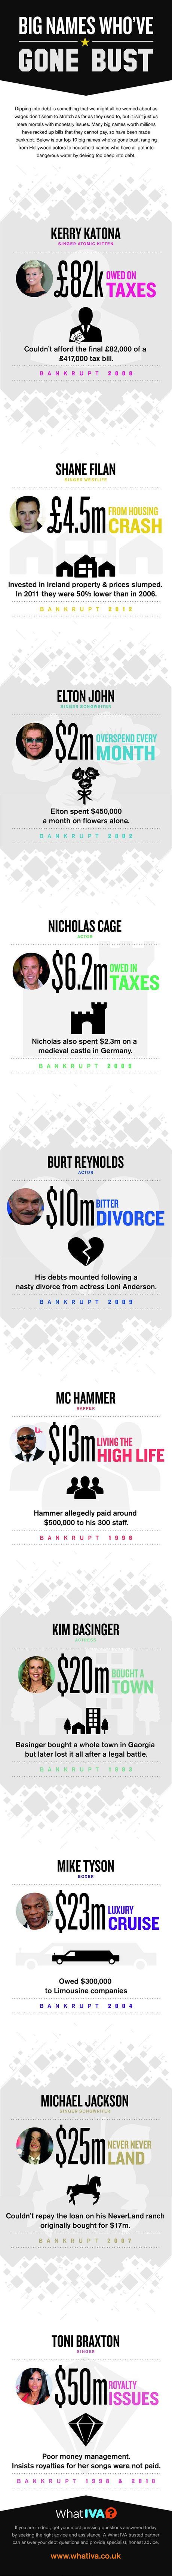 Celebrities That Have Gone Bankrupt Infographic